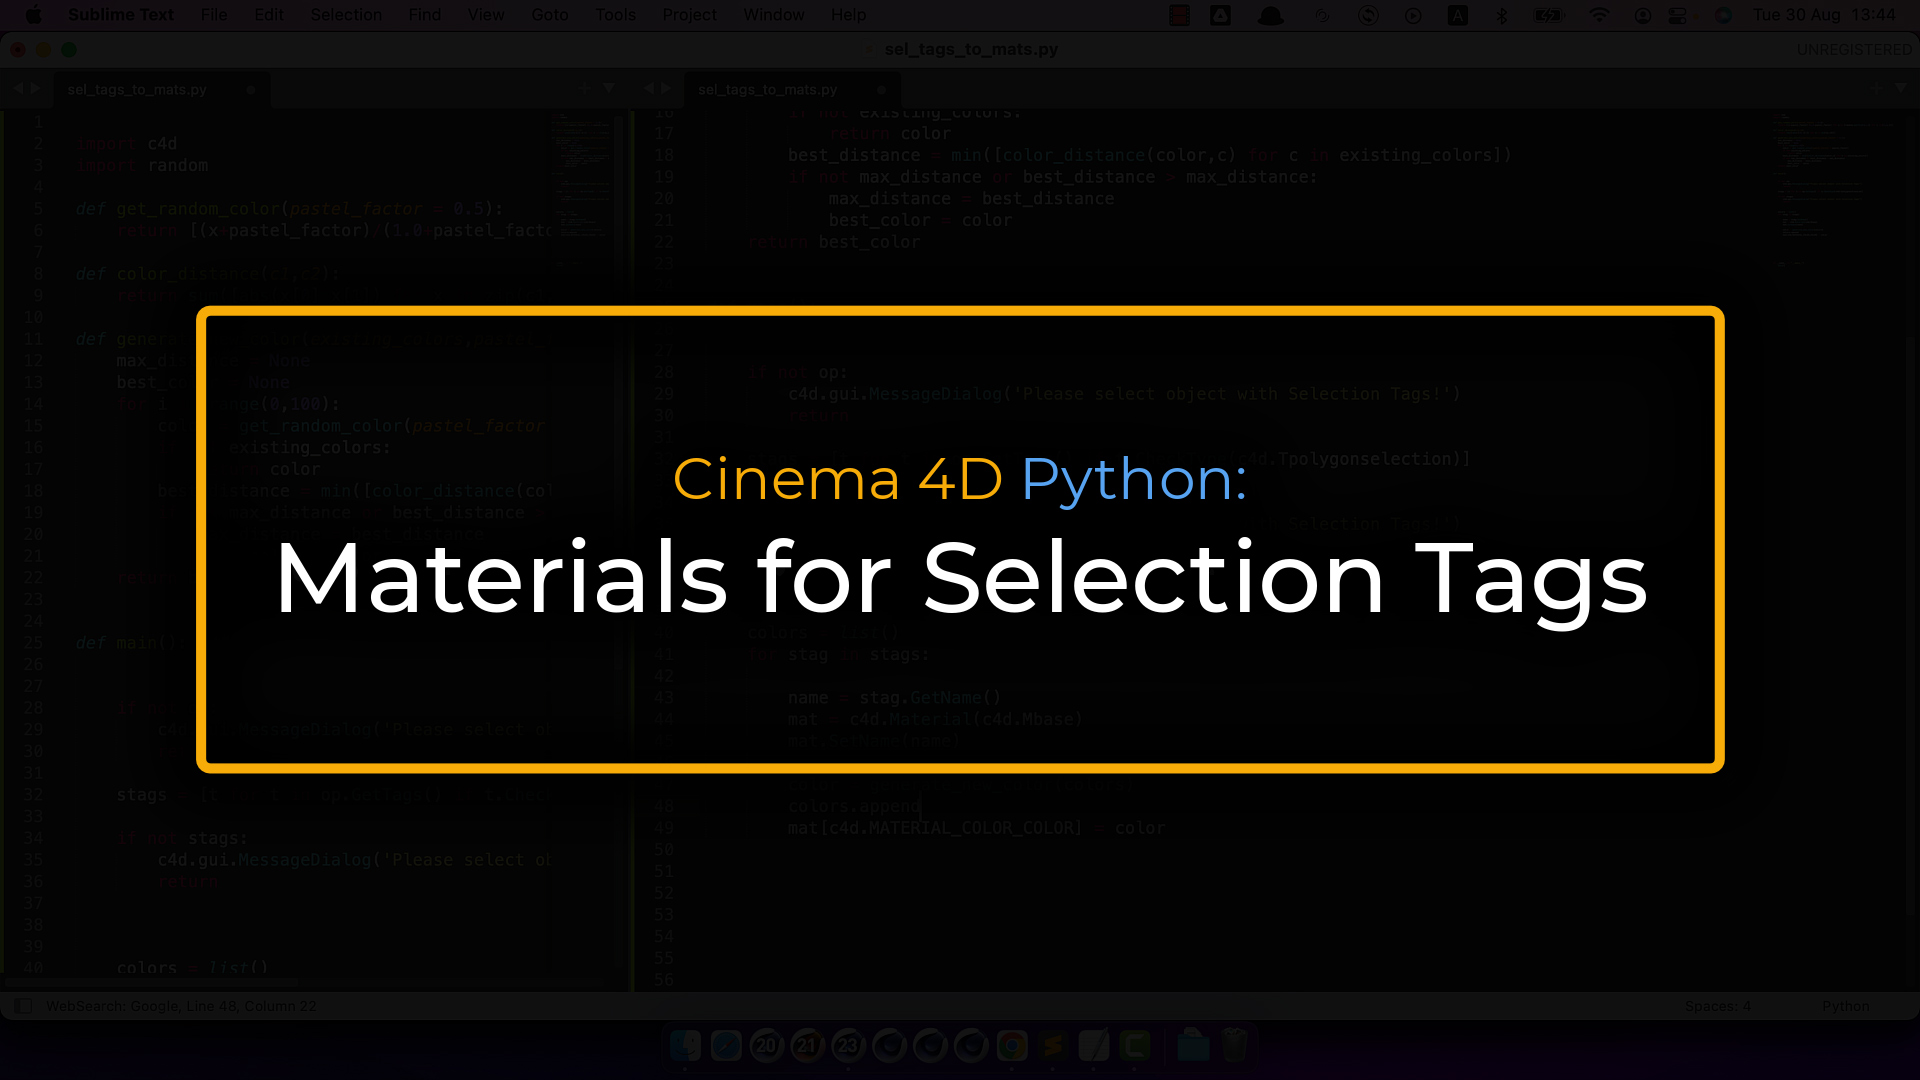 Cinema 4D Python: Materials for Selection Tags